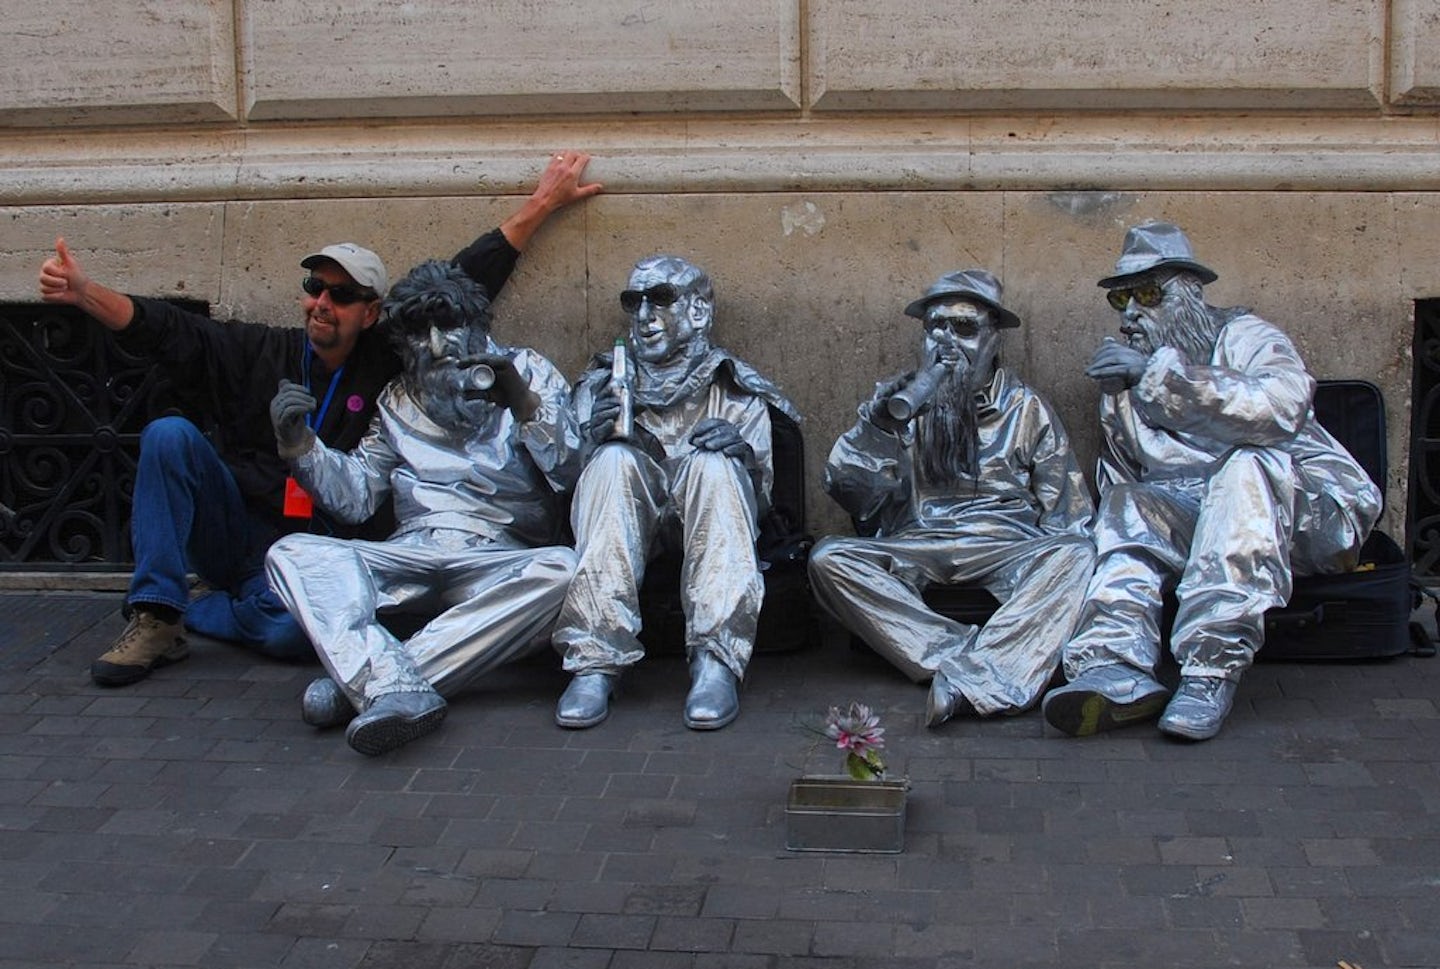 Hanging out with the street mimes while walking in Venice